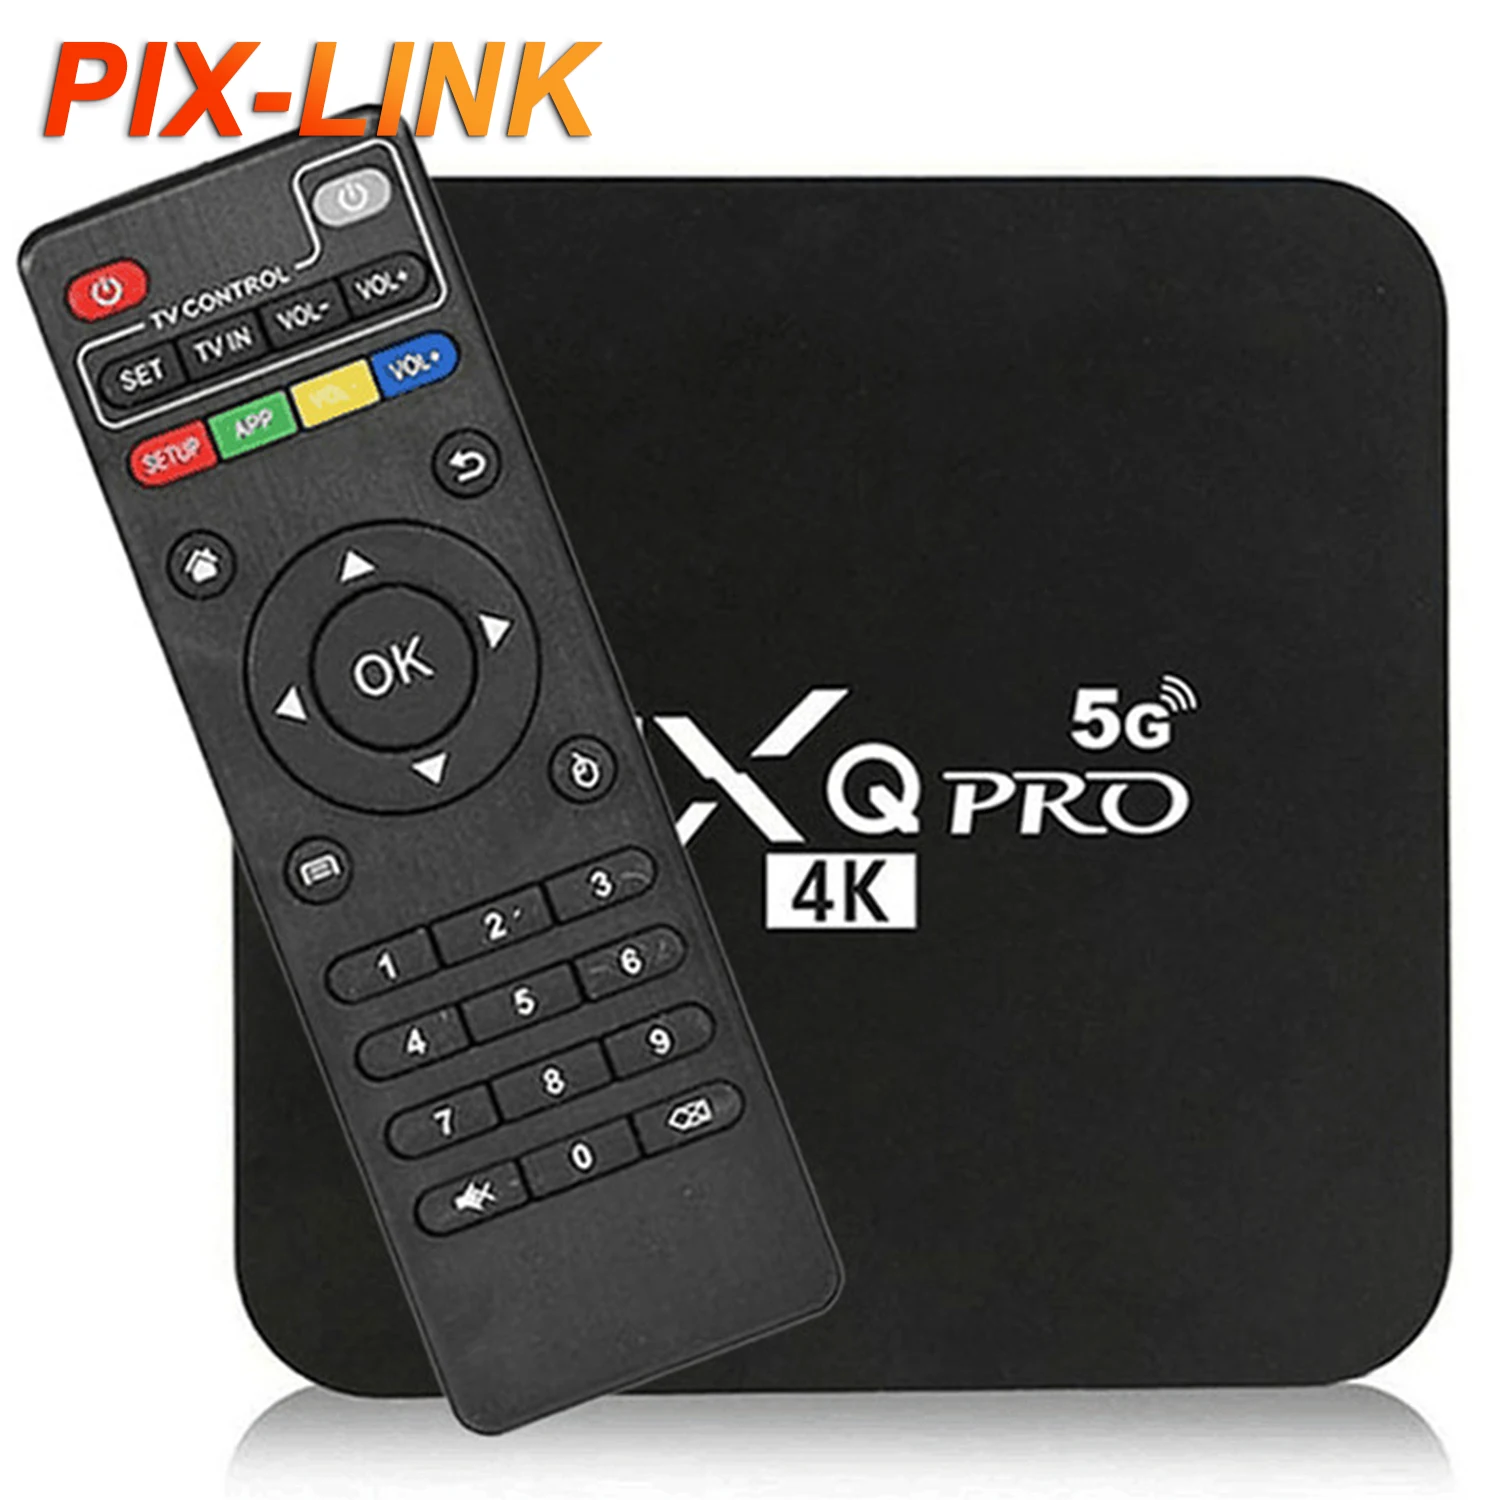 

Newest Iptv Live Streaming Amlogic S905X3 Ddr4 Android 9.0 Global Android Set Top Tv Box, Balck